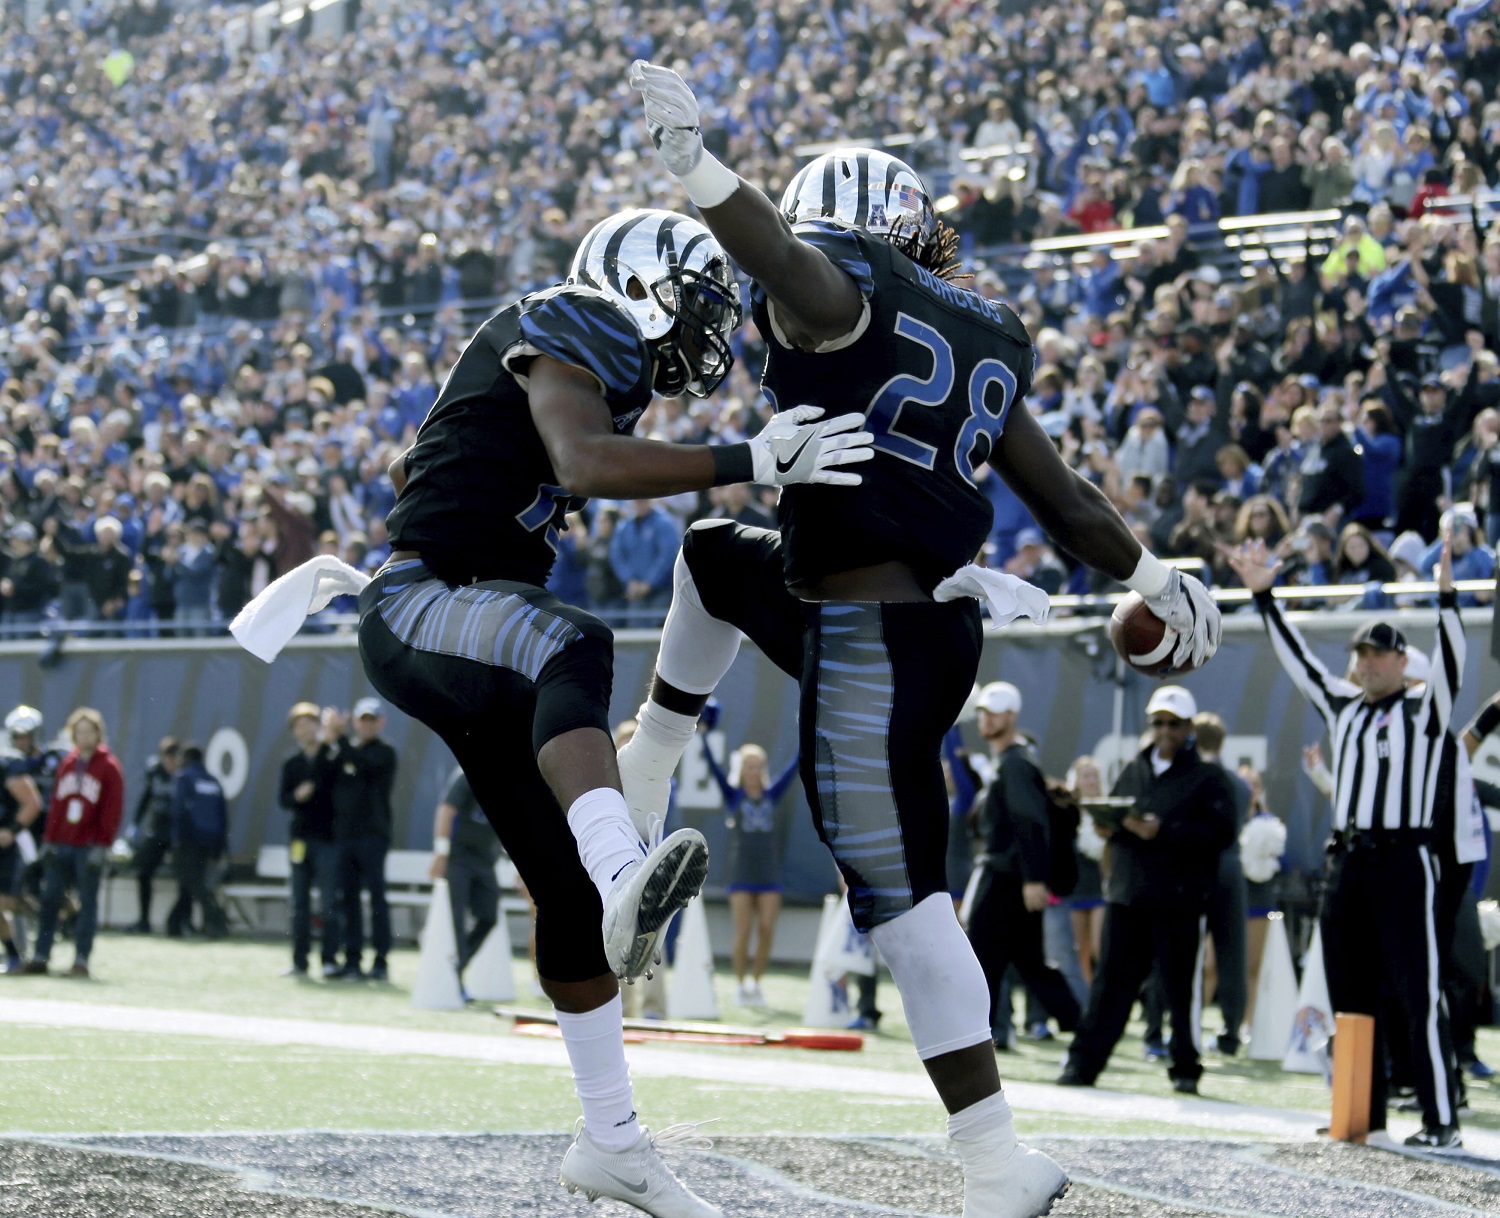 Memphis linebacker DeMarco Montgomery, left, and tail back Doroland Dorceus (28) celebrate a touchdown in the first half of an NCAA college football game Friday, Nov. 25, 2016, in Memphis, Tenn. (AP Photo/Nikki Boertman)